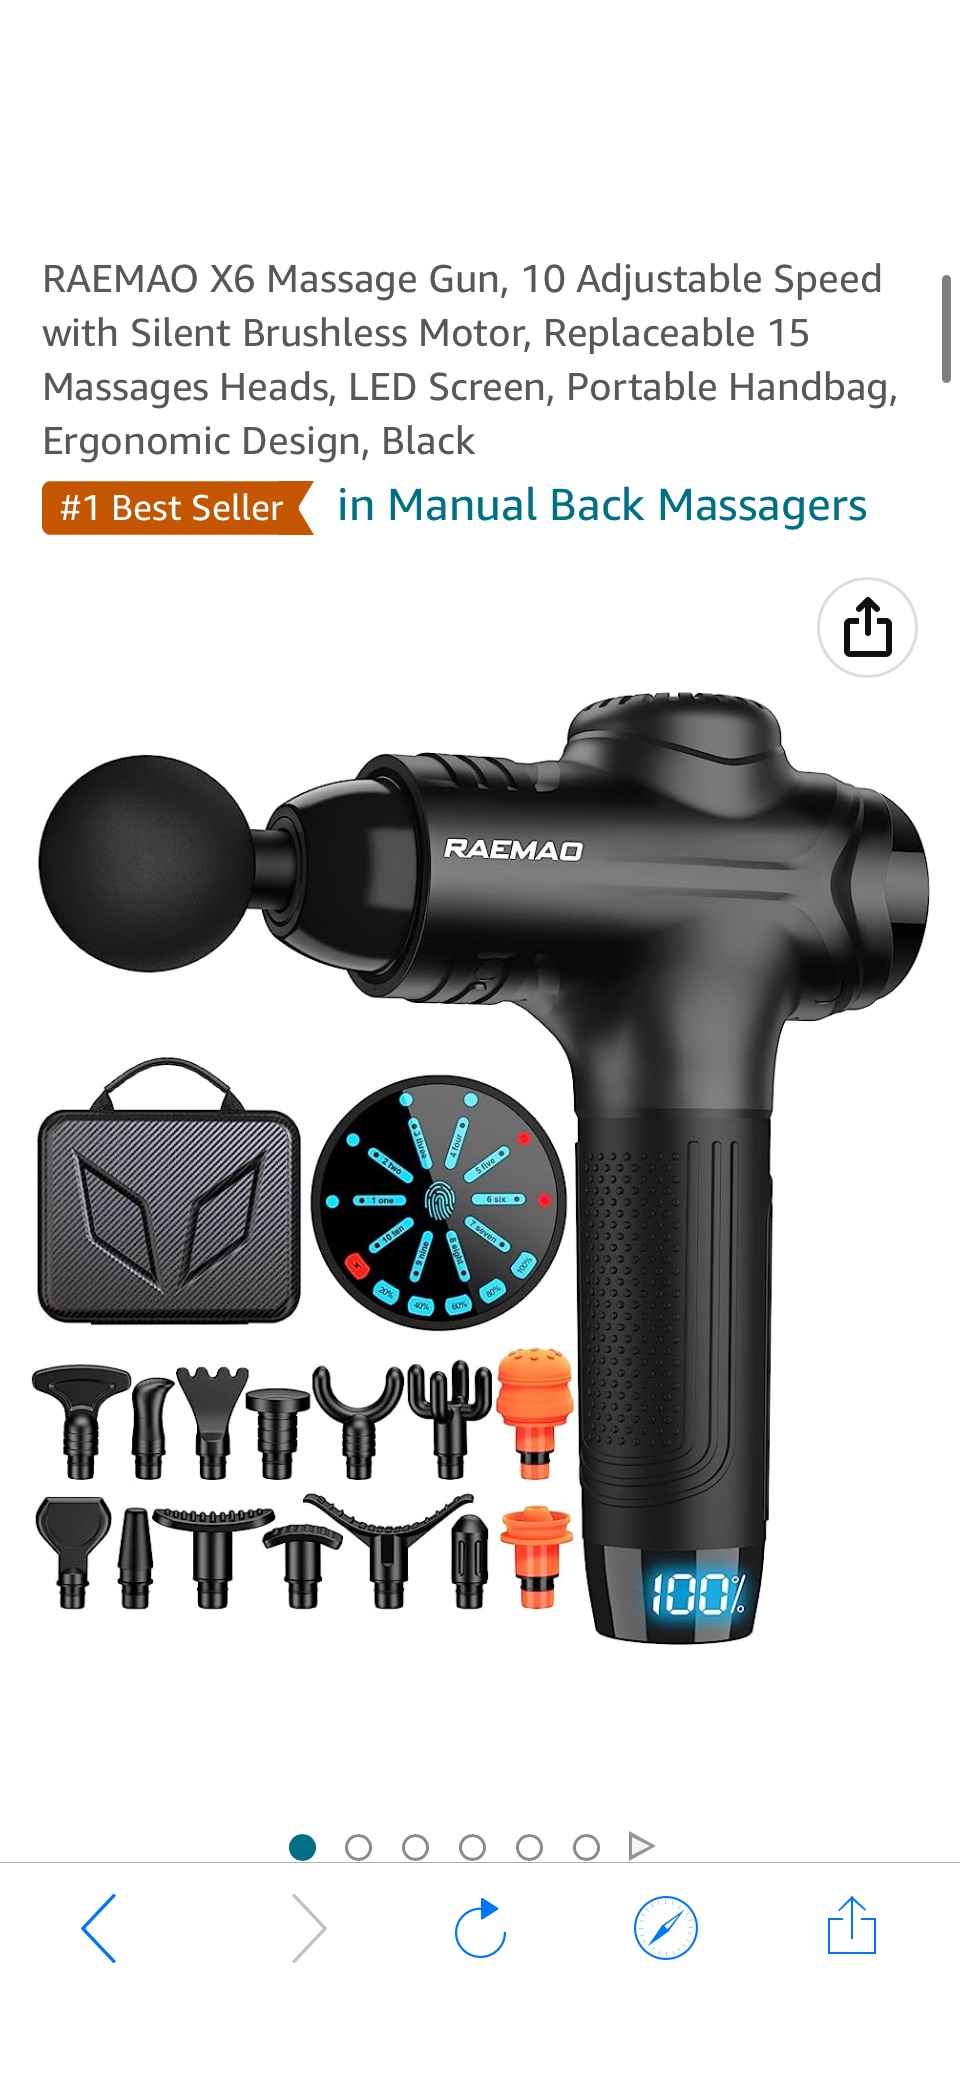 Amazon.com: RAEMAO X6 Massage Gun, 10 Adjustable Speed with Silent Brushless Motor, Replaceable 15 Massages Heads, LED Screen, Portable原价199.99